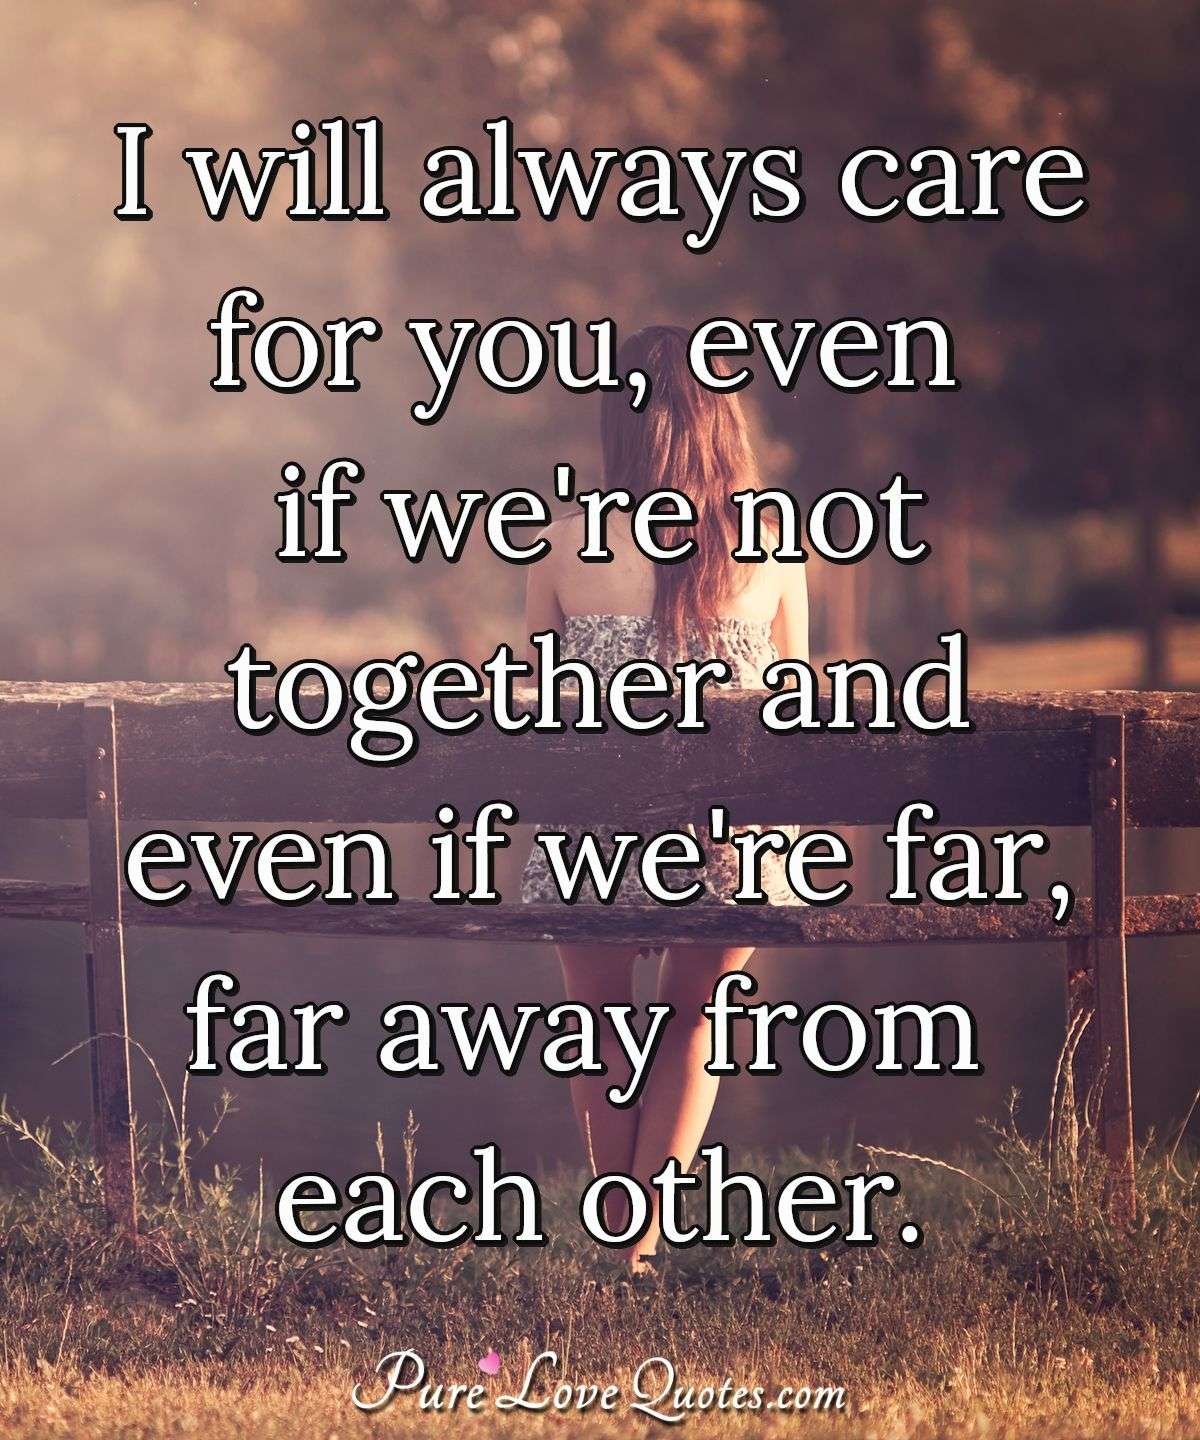 I will always care for you, even if we're not together and even if we're far, far away from each other. - Anonymous